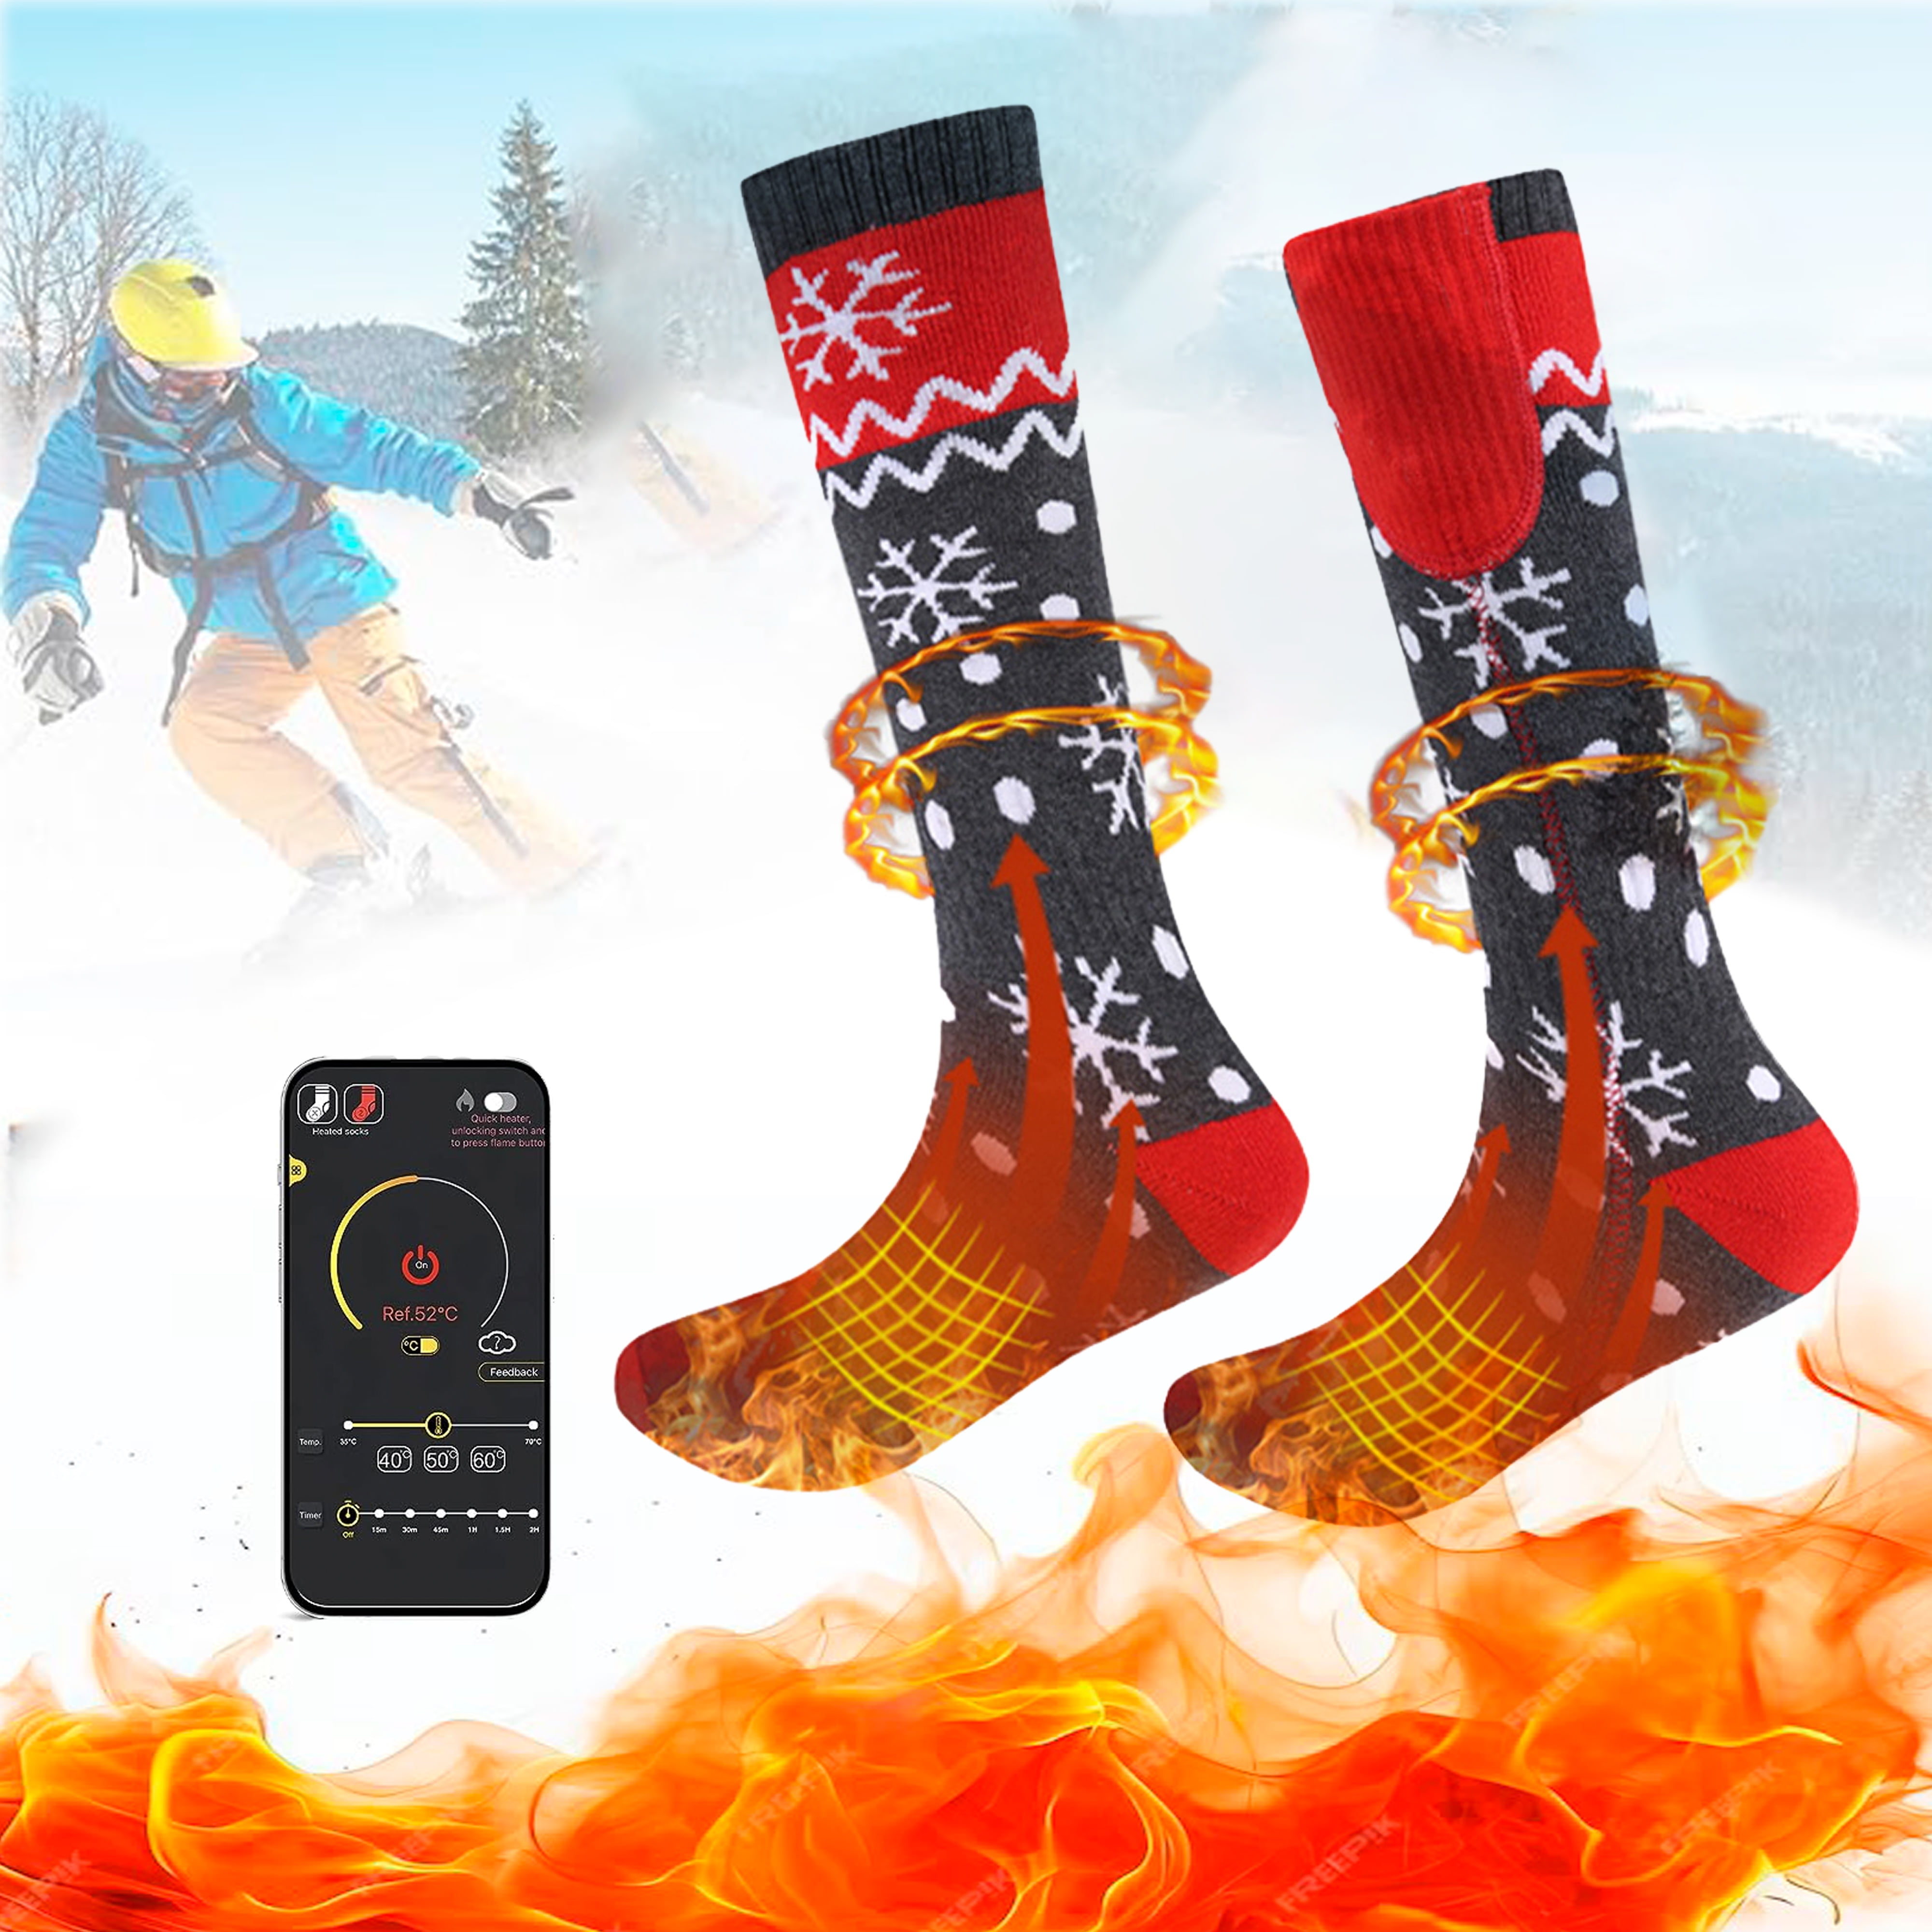 5000mAh Rechargeable Heated Socks for Men Women,Washable Electric Thermal Warming  Socks with APP Remote Control for Hunting Winter Skiing Outdoors 